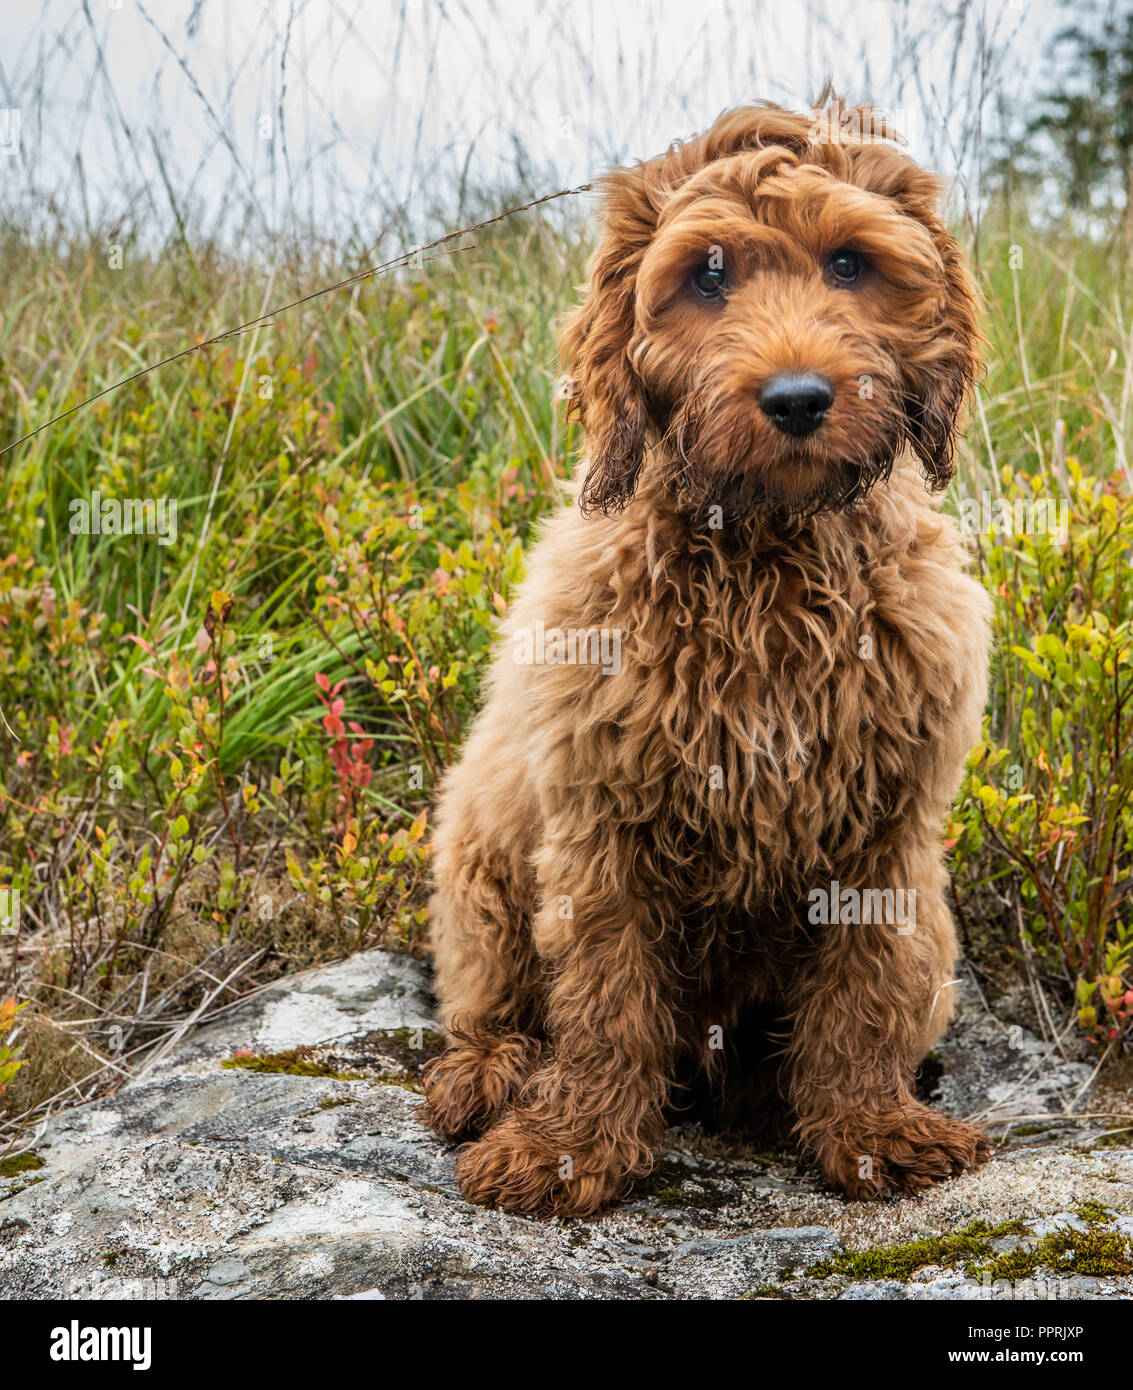 Baby Cockapoo High Resolution Stock Photography and Images - Alamy